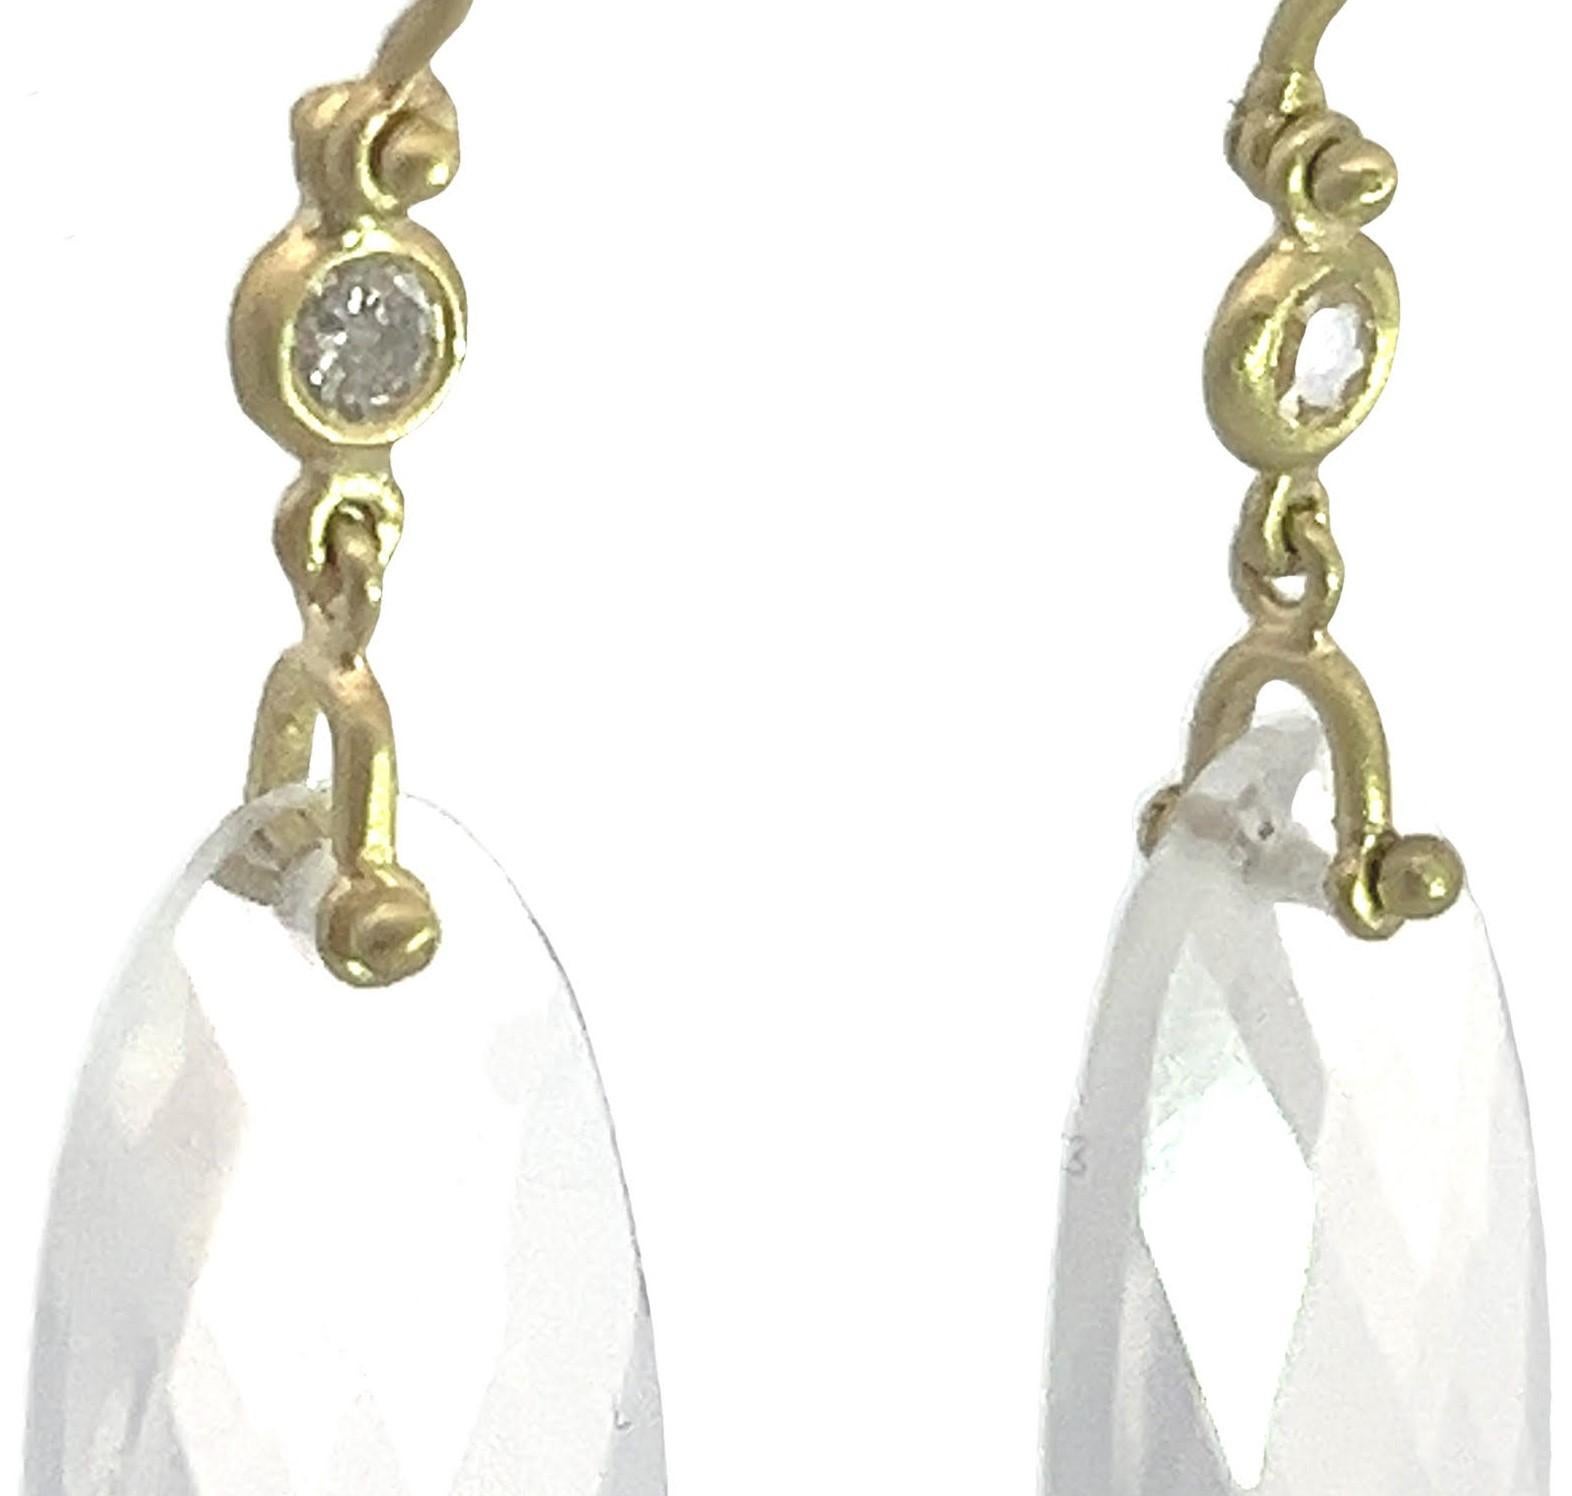 Faye Kim's handmade 18 Karat Gold Crystal Quartz and Diamond Leaf Earrings feature a faceted leaf-shaped crystal quartz suspended by a gold hinge beneath a bezel set round diamond. Matte finished and attached to French ear wires, these earrings